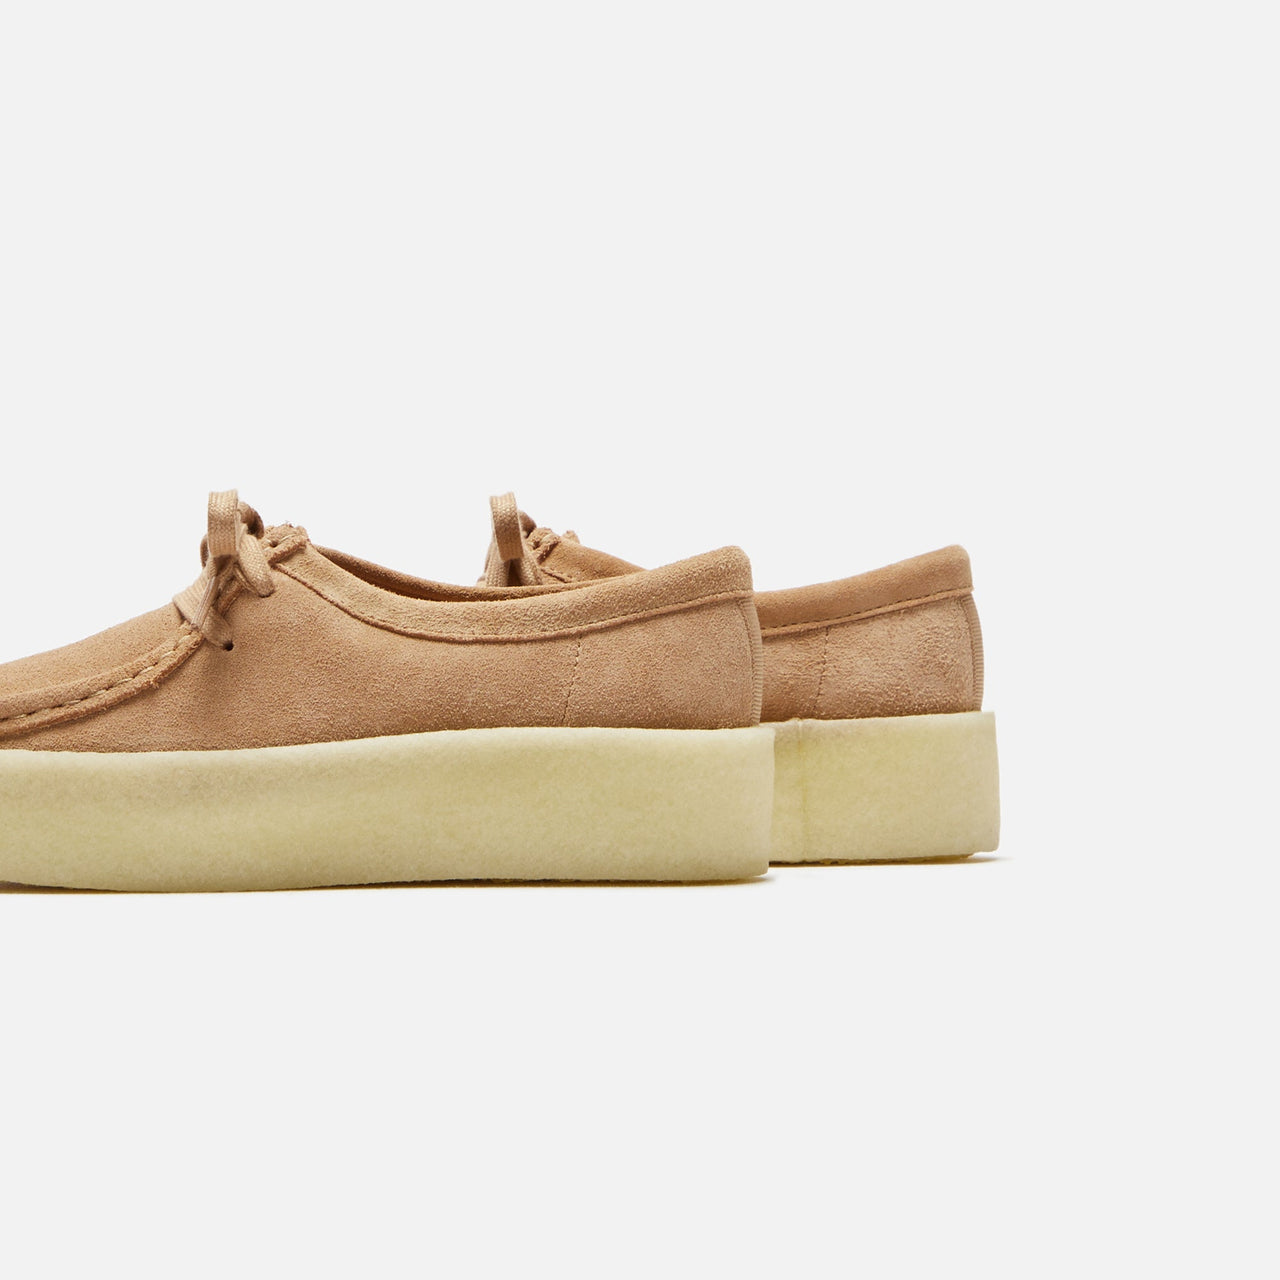 Close-up of the Clarks Originals Wallabee Cup Women's Warm Beige Suede 261732524 suede material